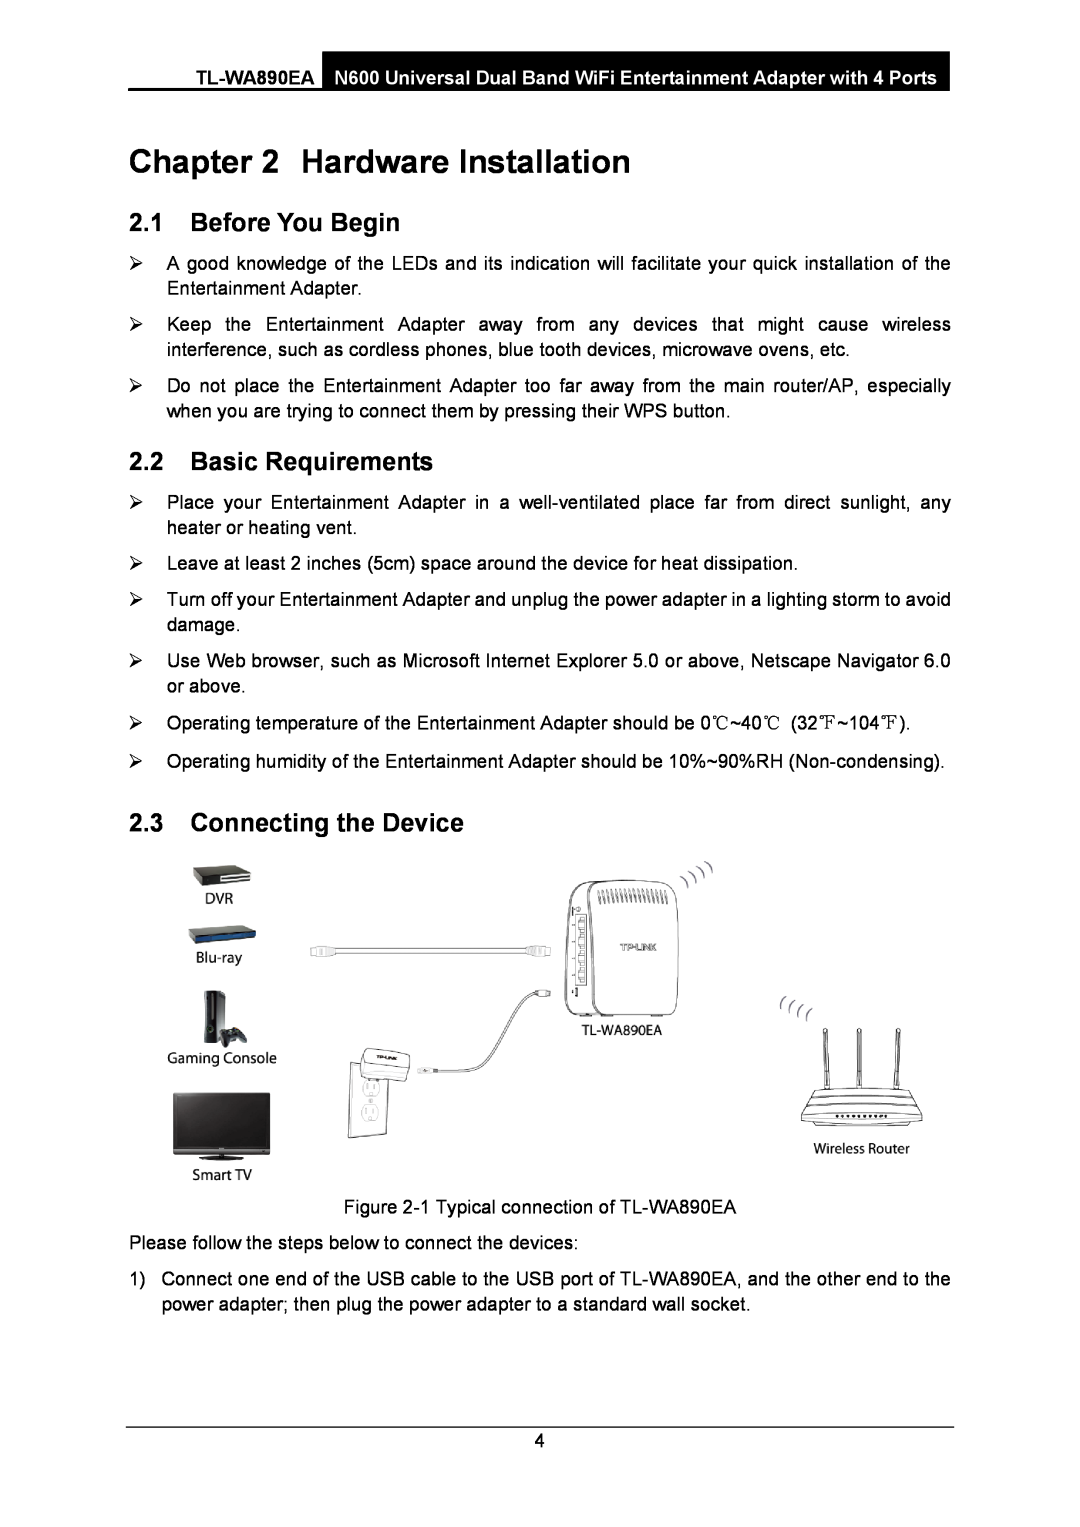 TP-Link WA-890EA manual Hardware Installation, Before You Begin, Basic Requirements, Connecting the Device 